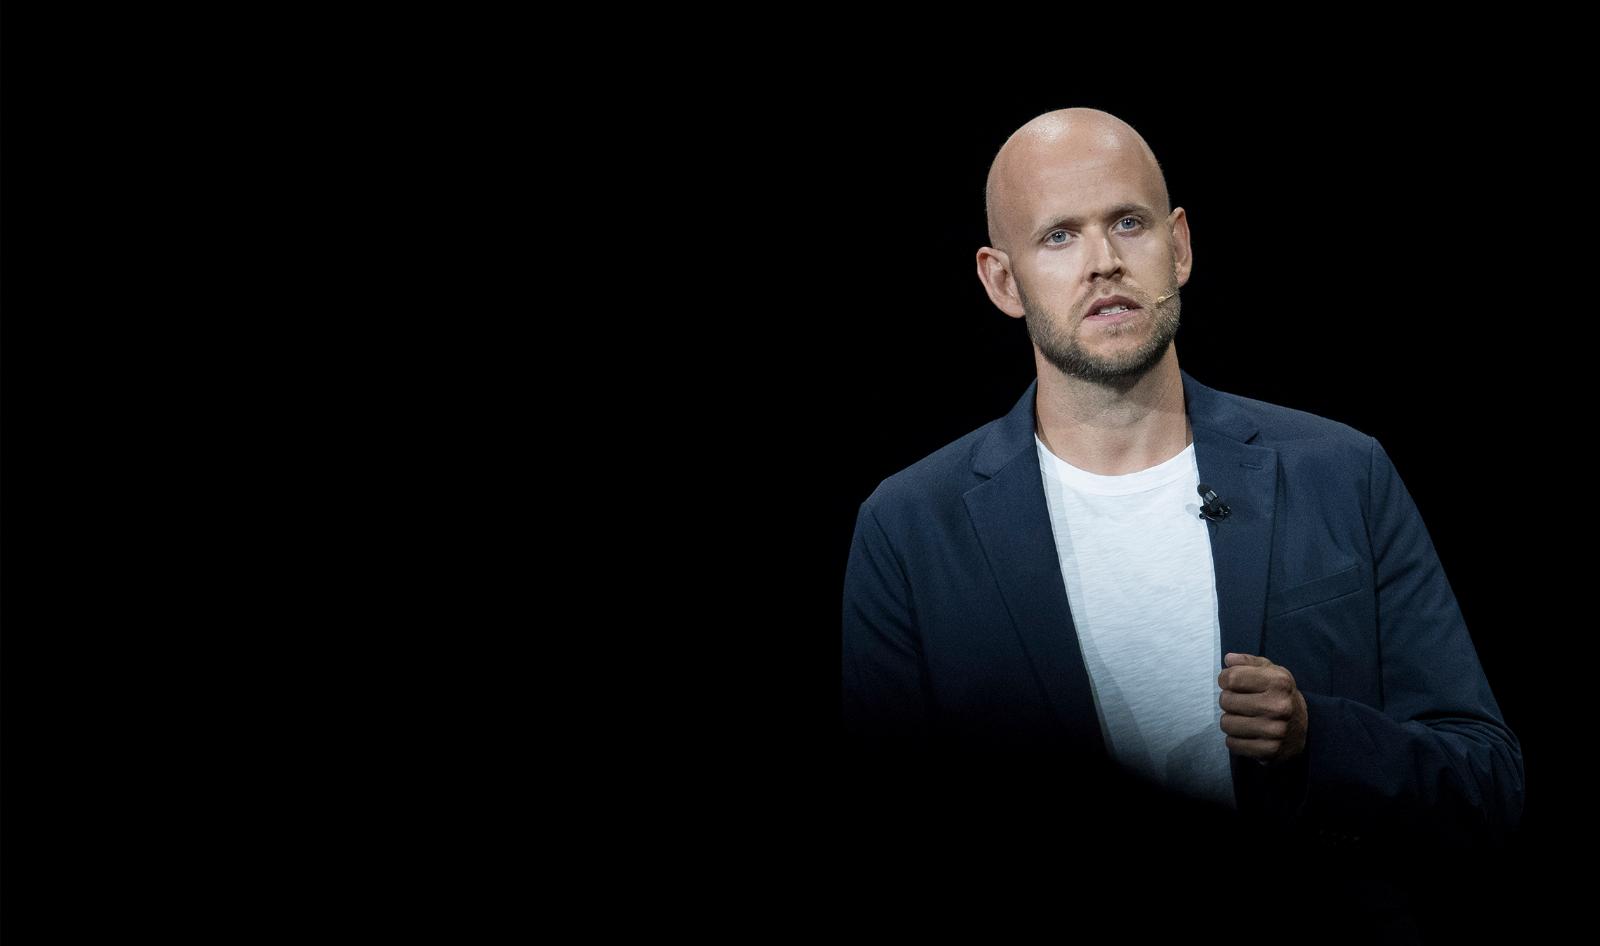 Spotify CEO teases potential AI-powered capabilities surrounding personalization, ads